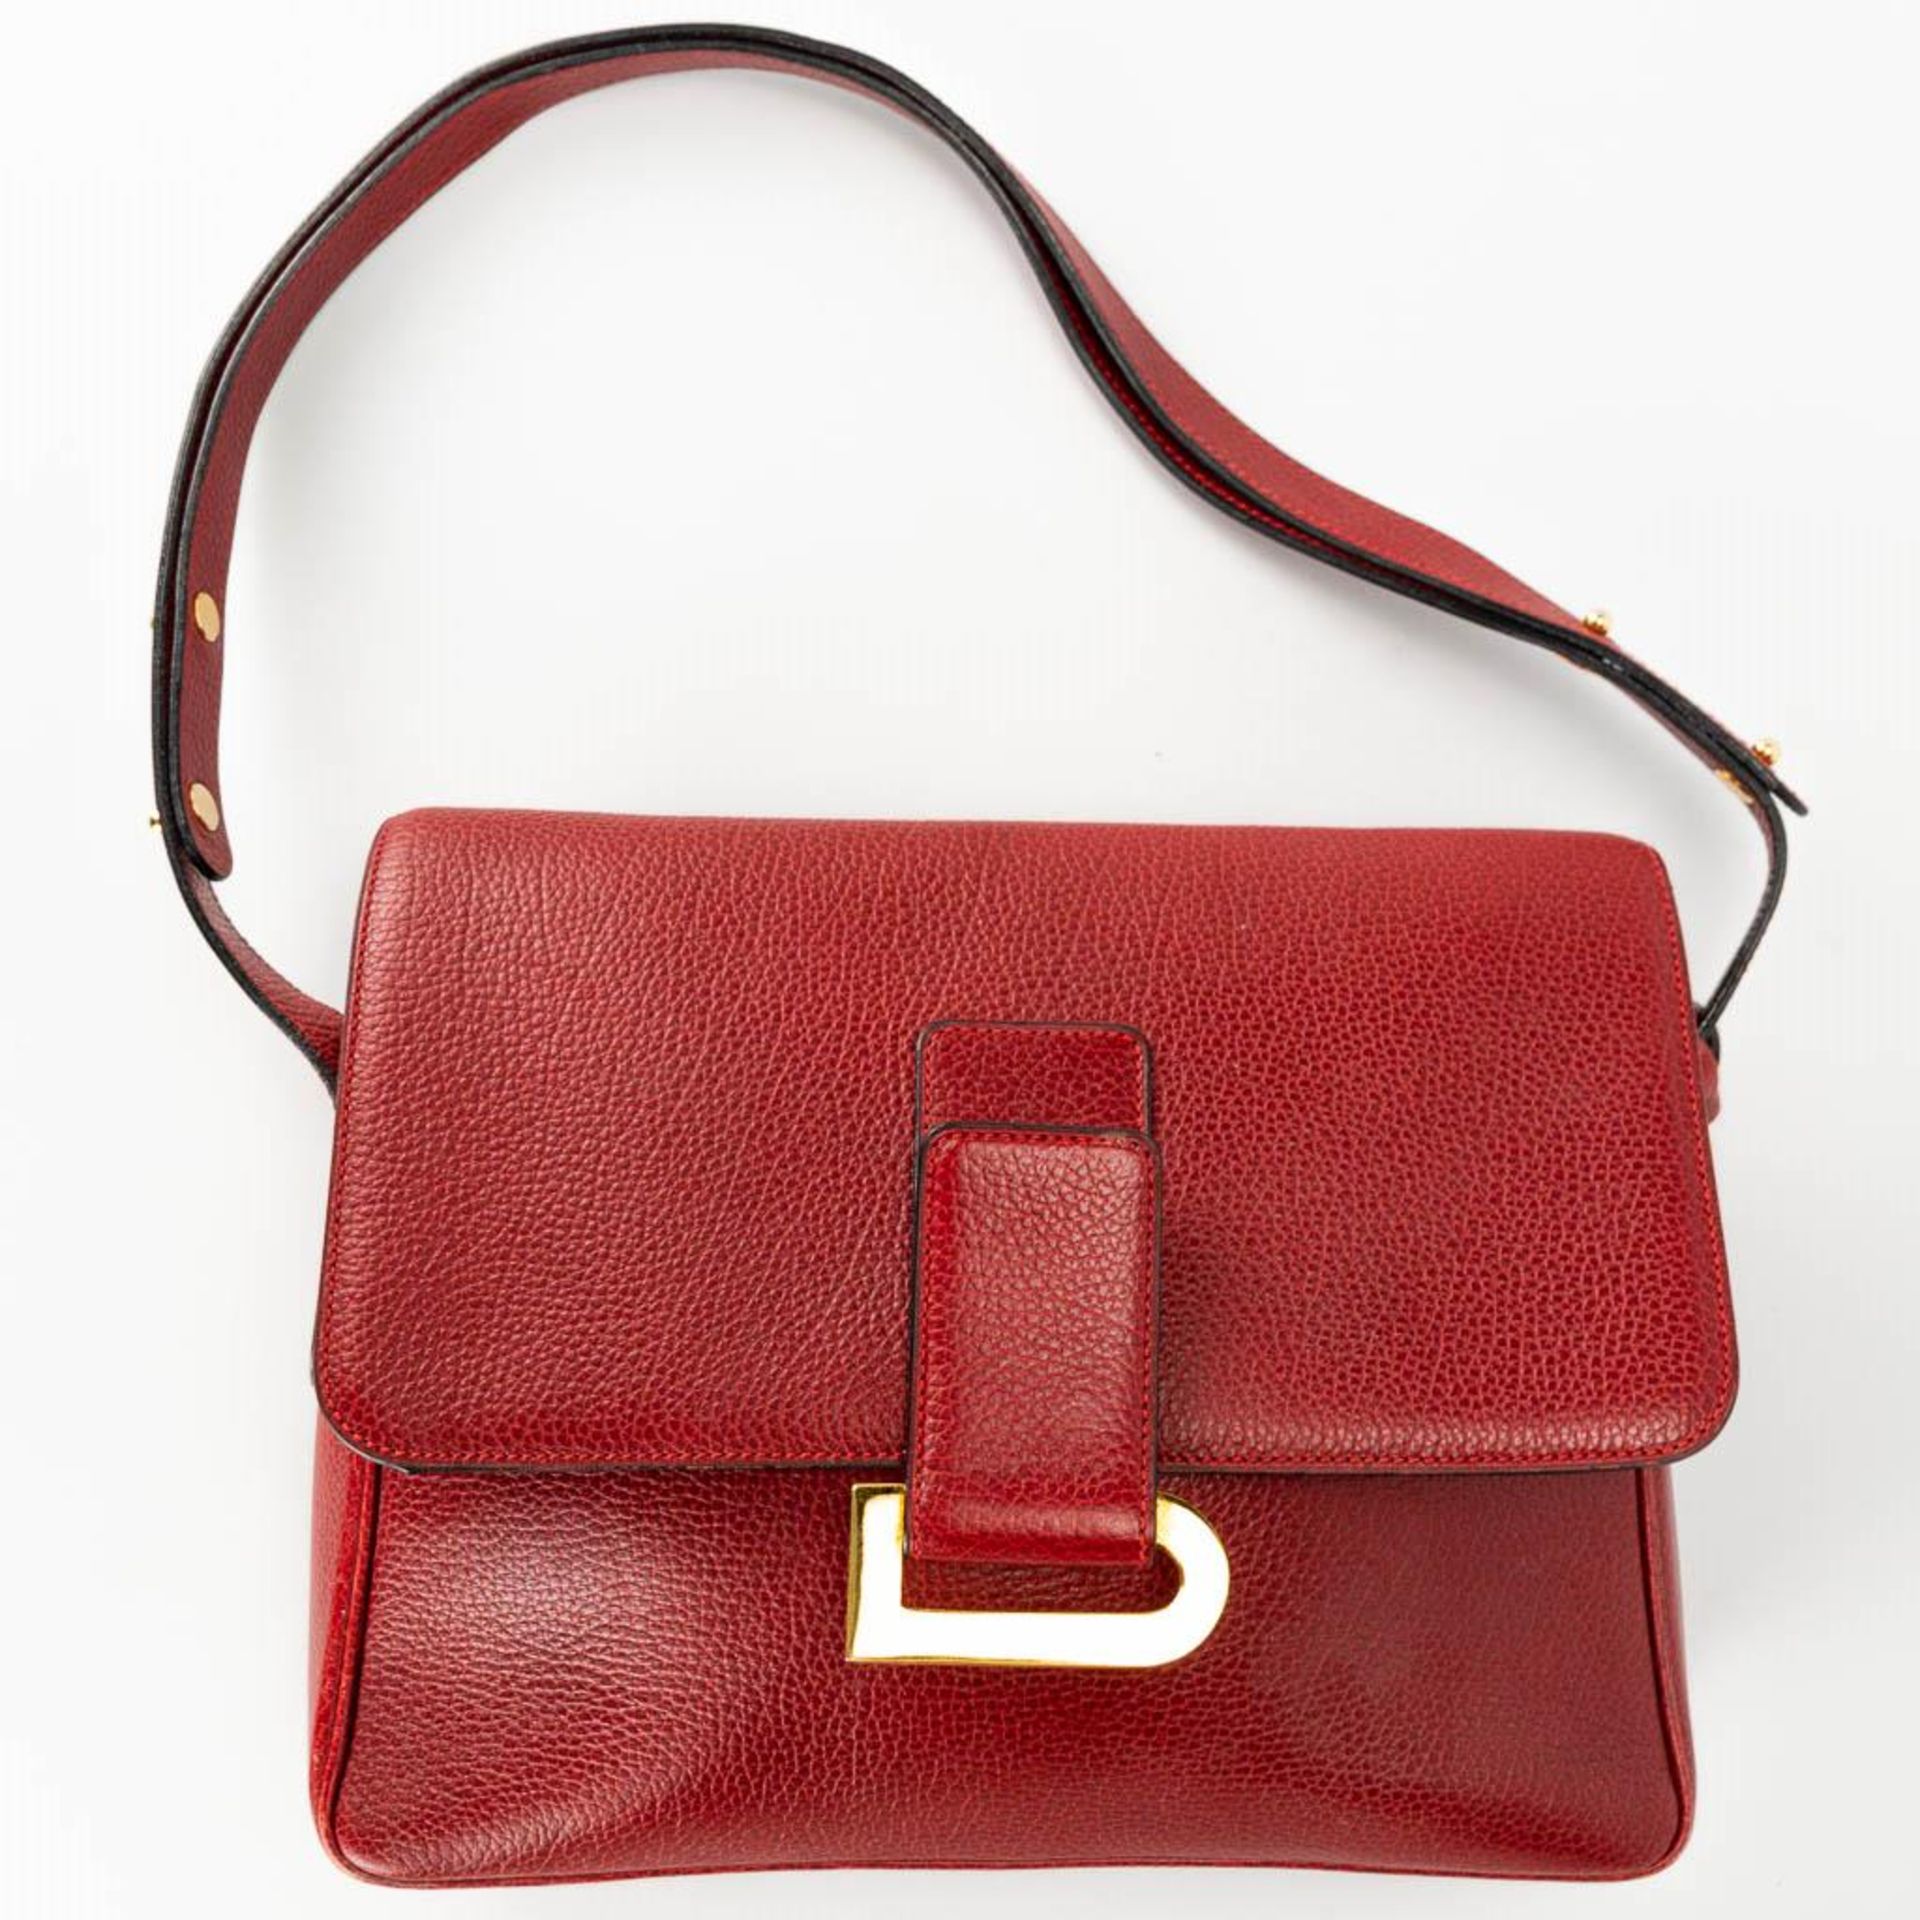 A purse made of red leather and marked Delvaux. - Image 16 of 16